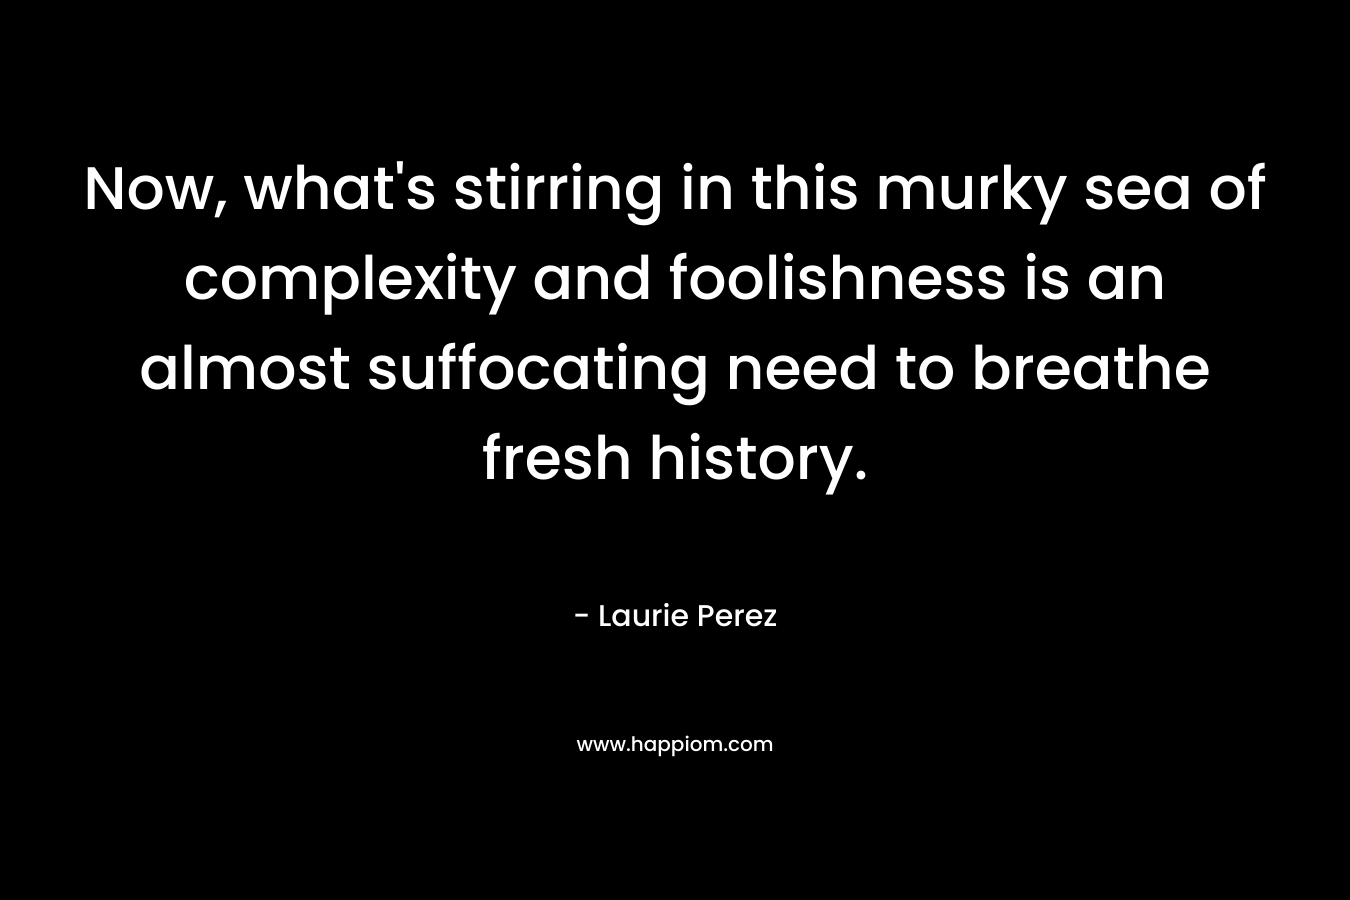 Now, what’s stirring in this murky sea of complexity and foolishness is an almost suffocating need to breathe fresh history. – Laurie Perez